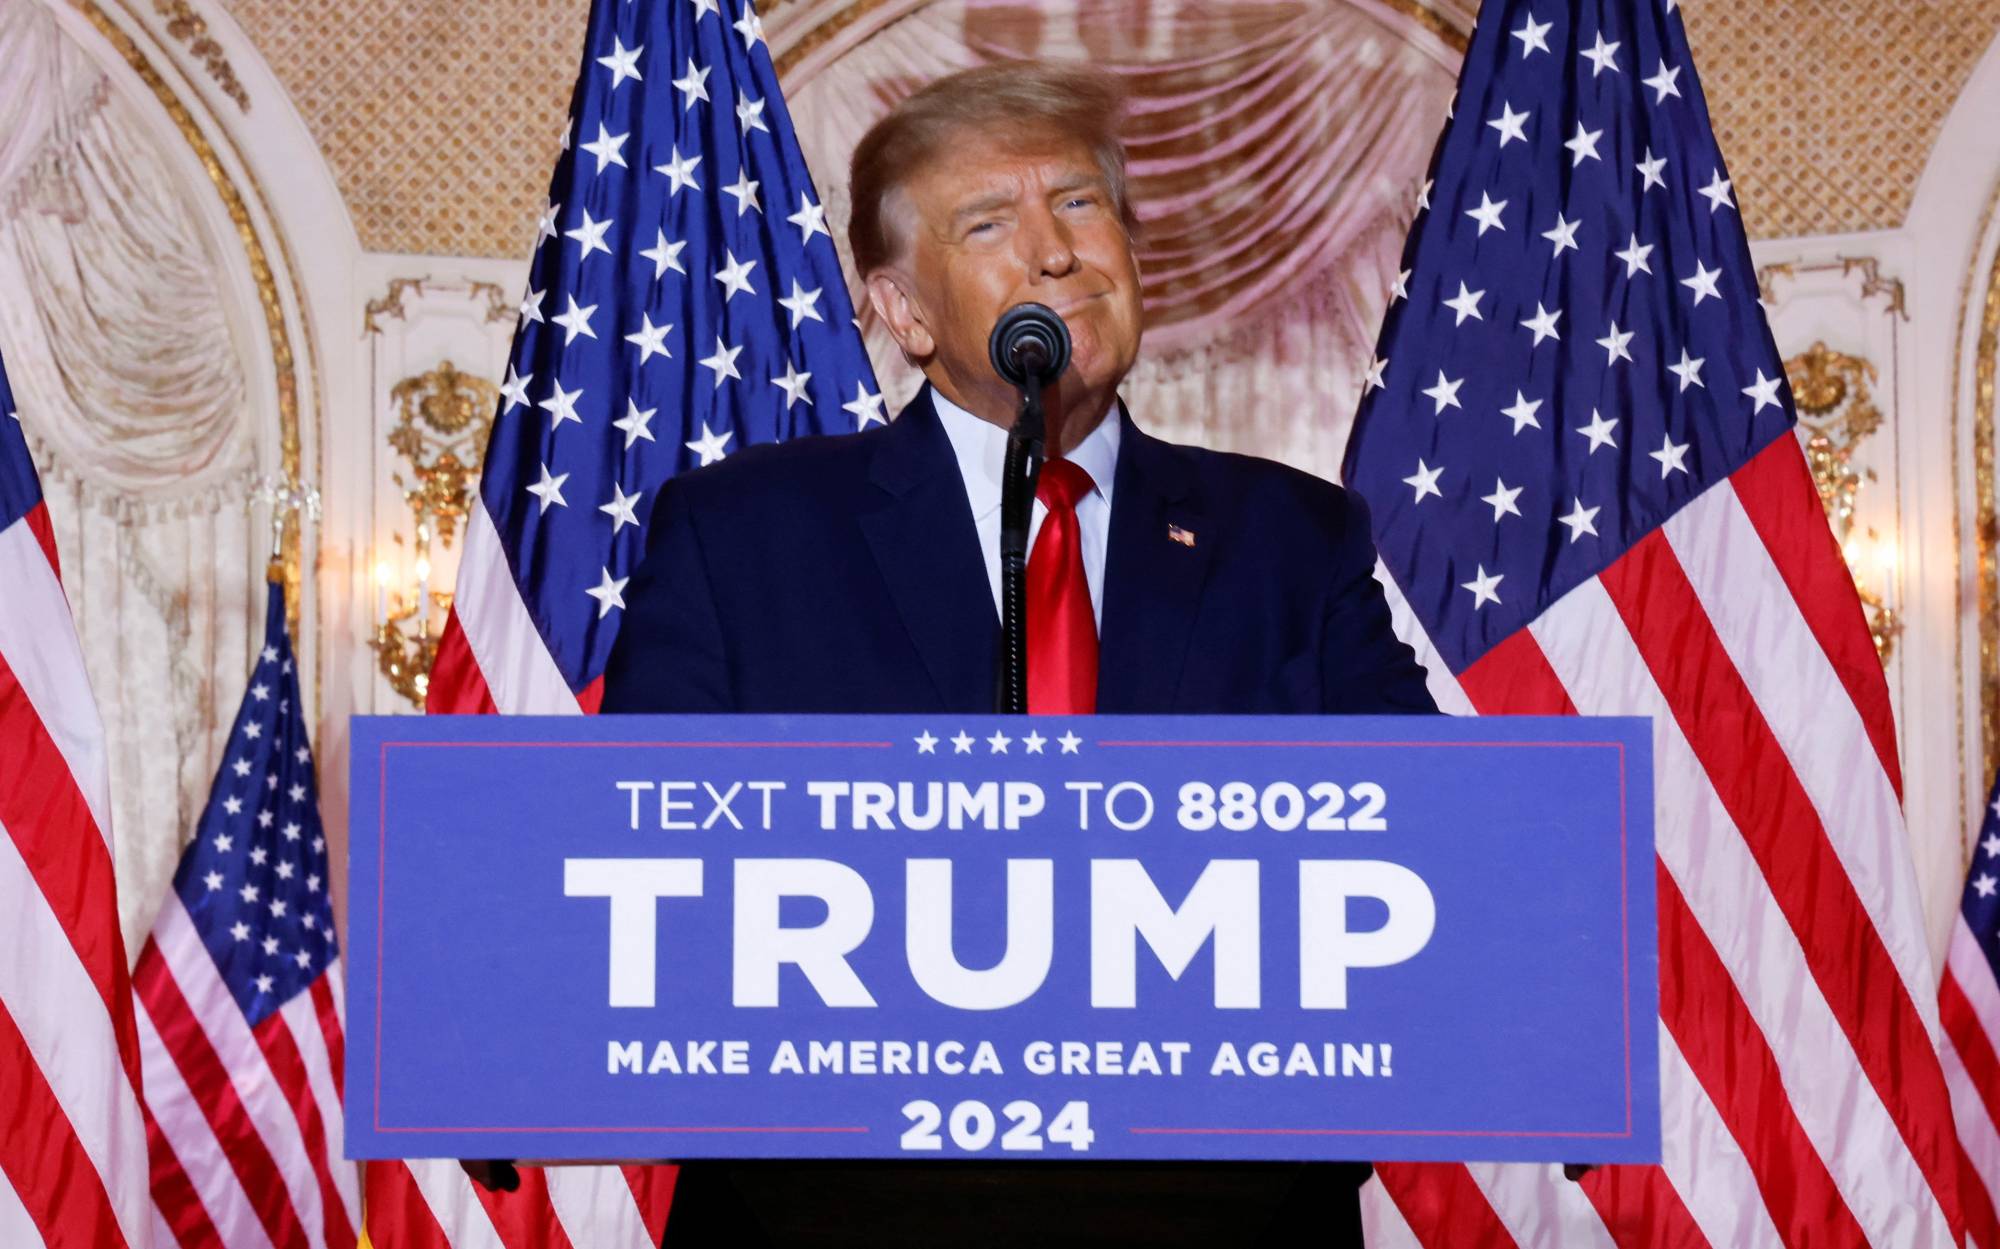 Trump launches 2024 U.S. presidential run, getting jump on rivals The